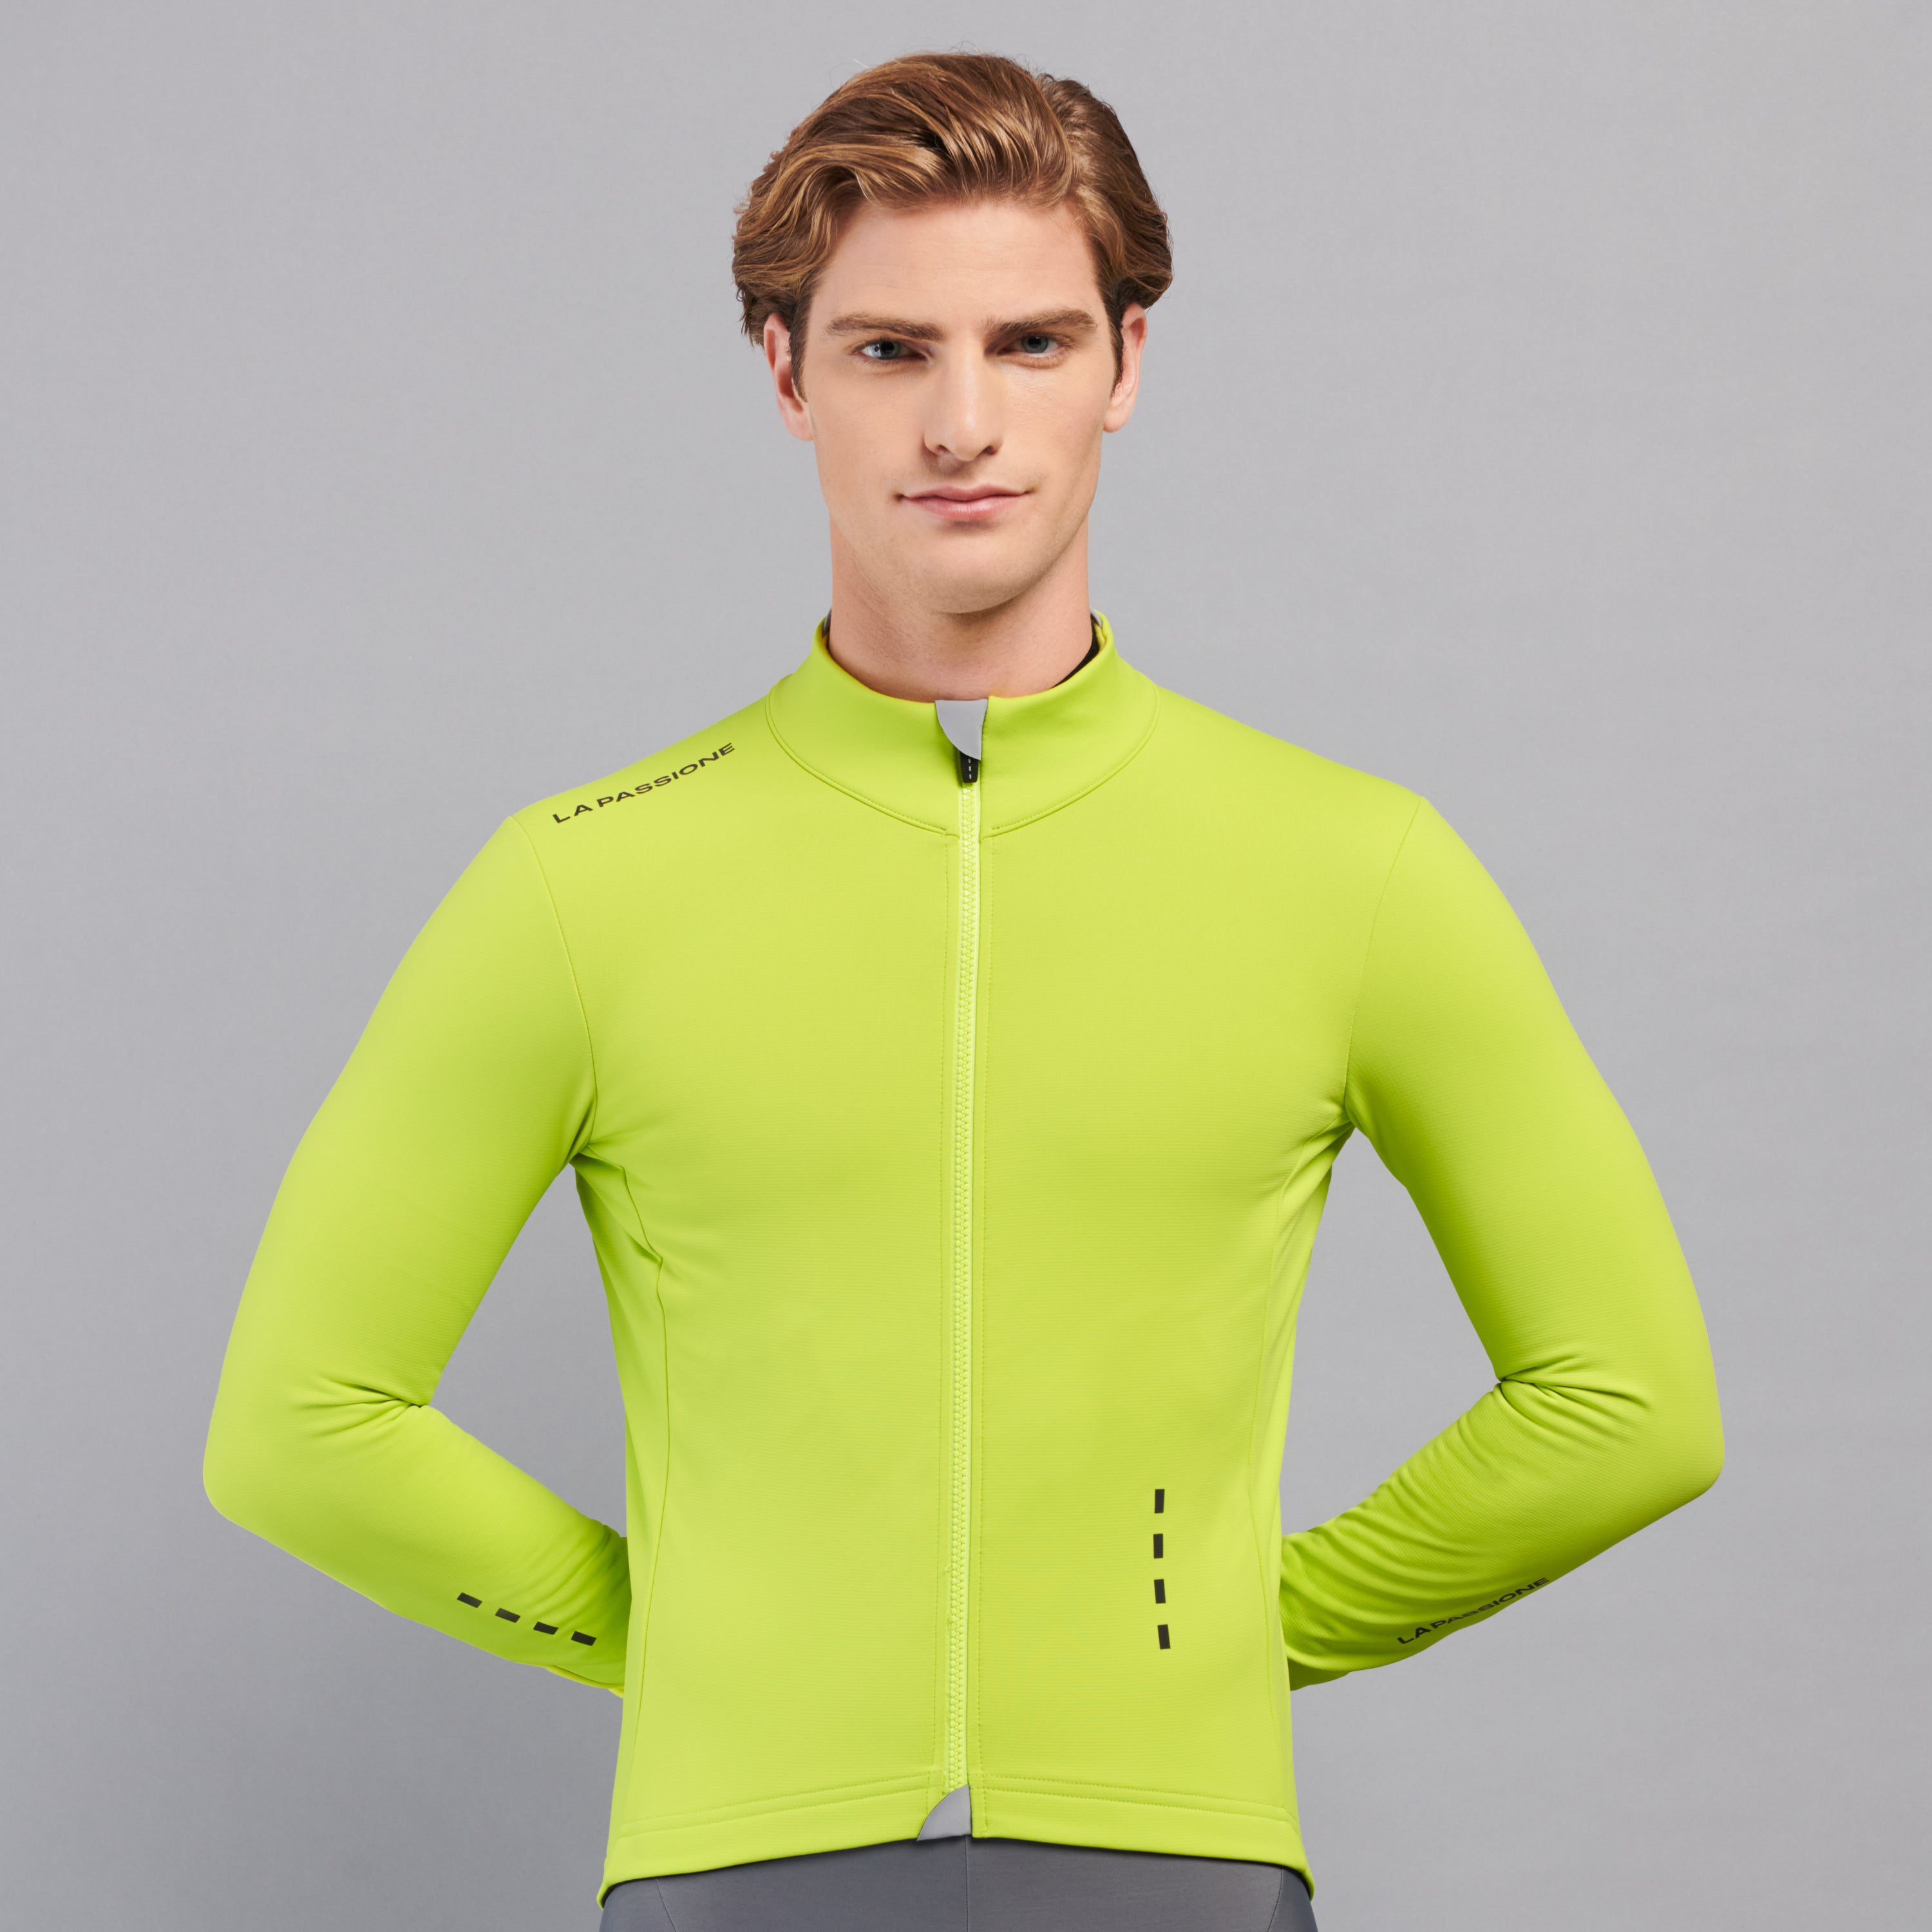 Giacca Ciclismo Invernale Prestige Winter Jacket Beat Lime Uomo